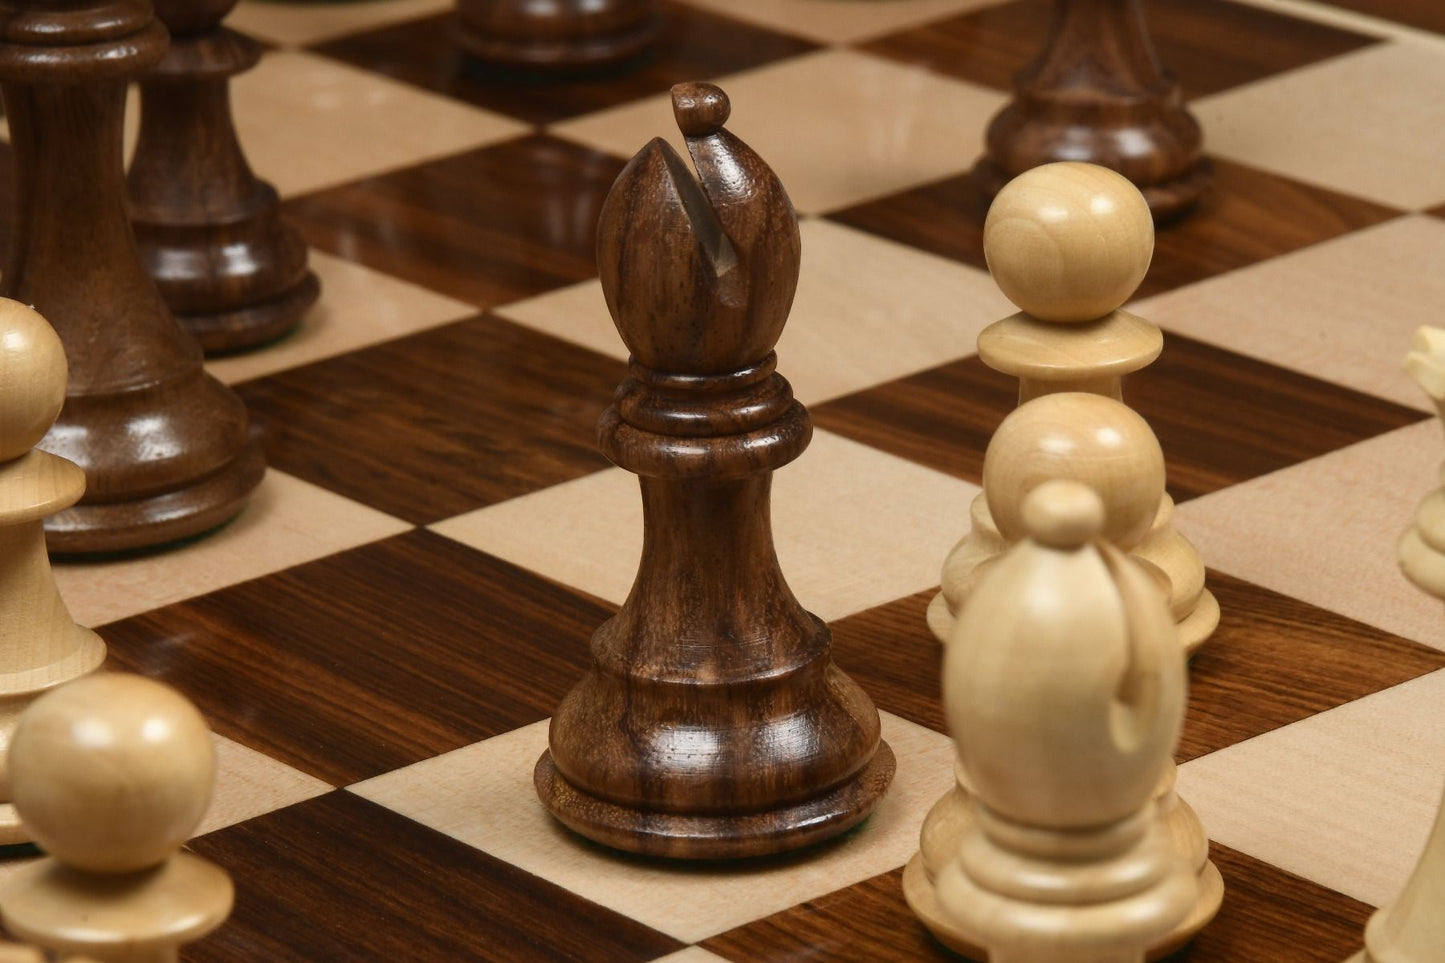 The Honour of Staunton Series Chess Pieces in Sheesham Boxwood - 4.0" King with Board